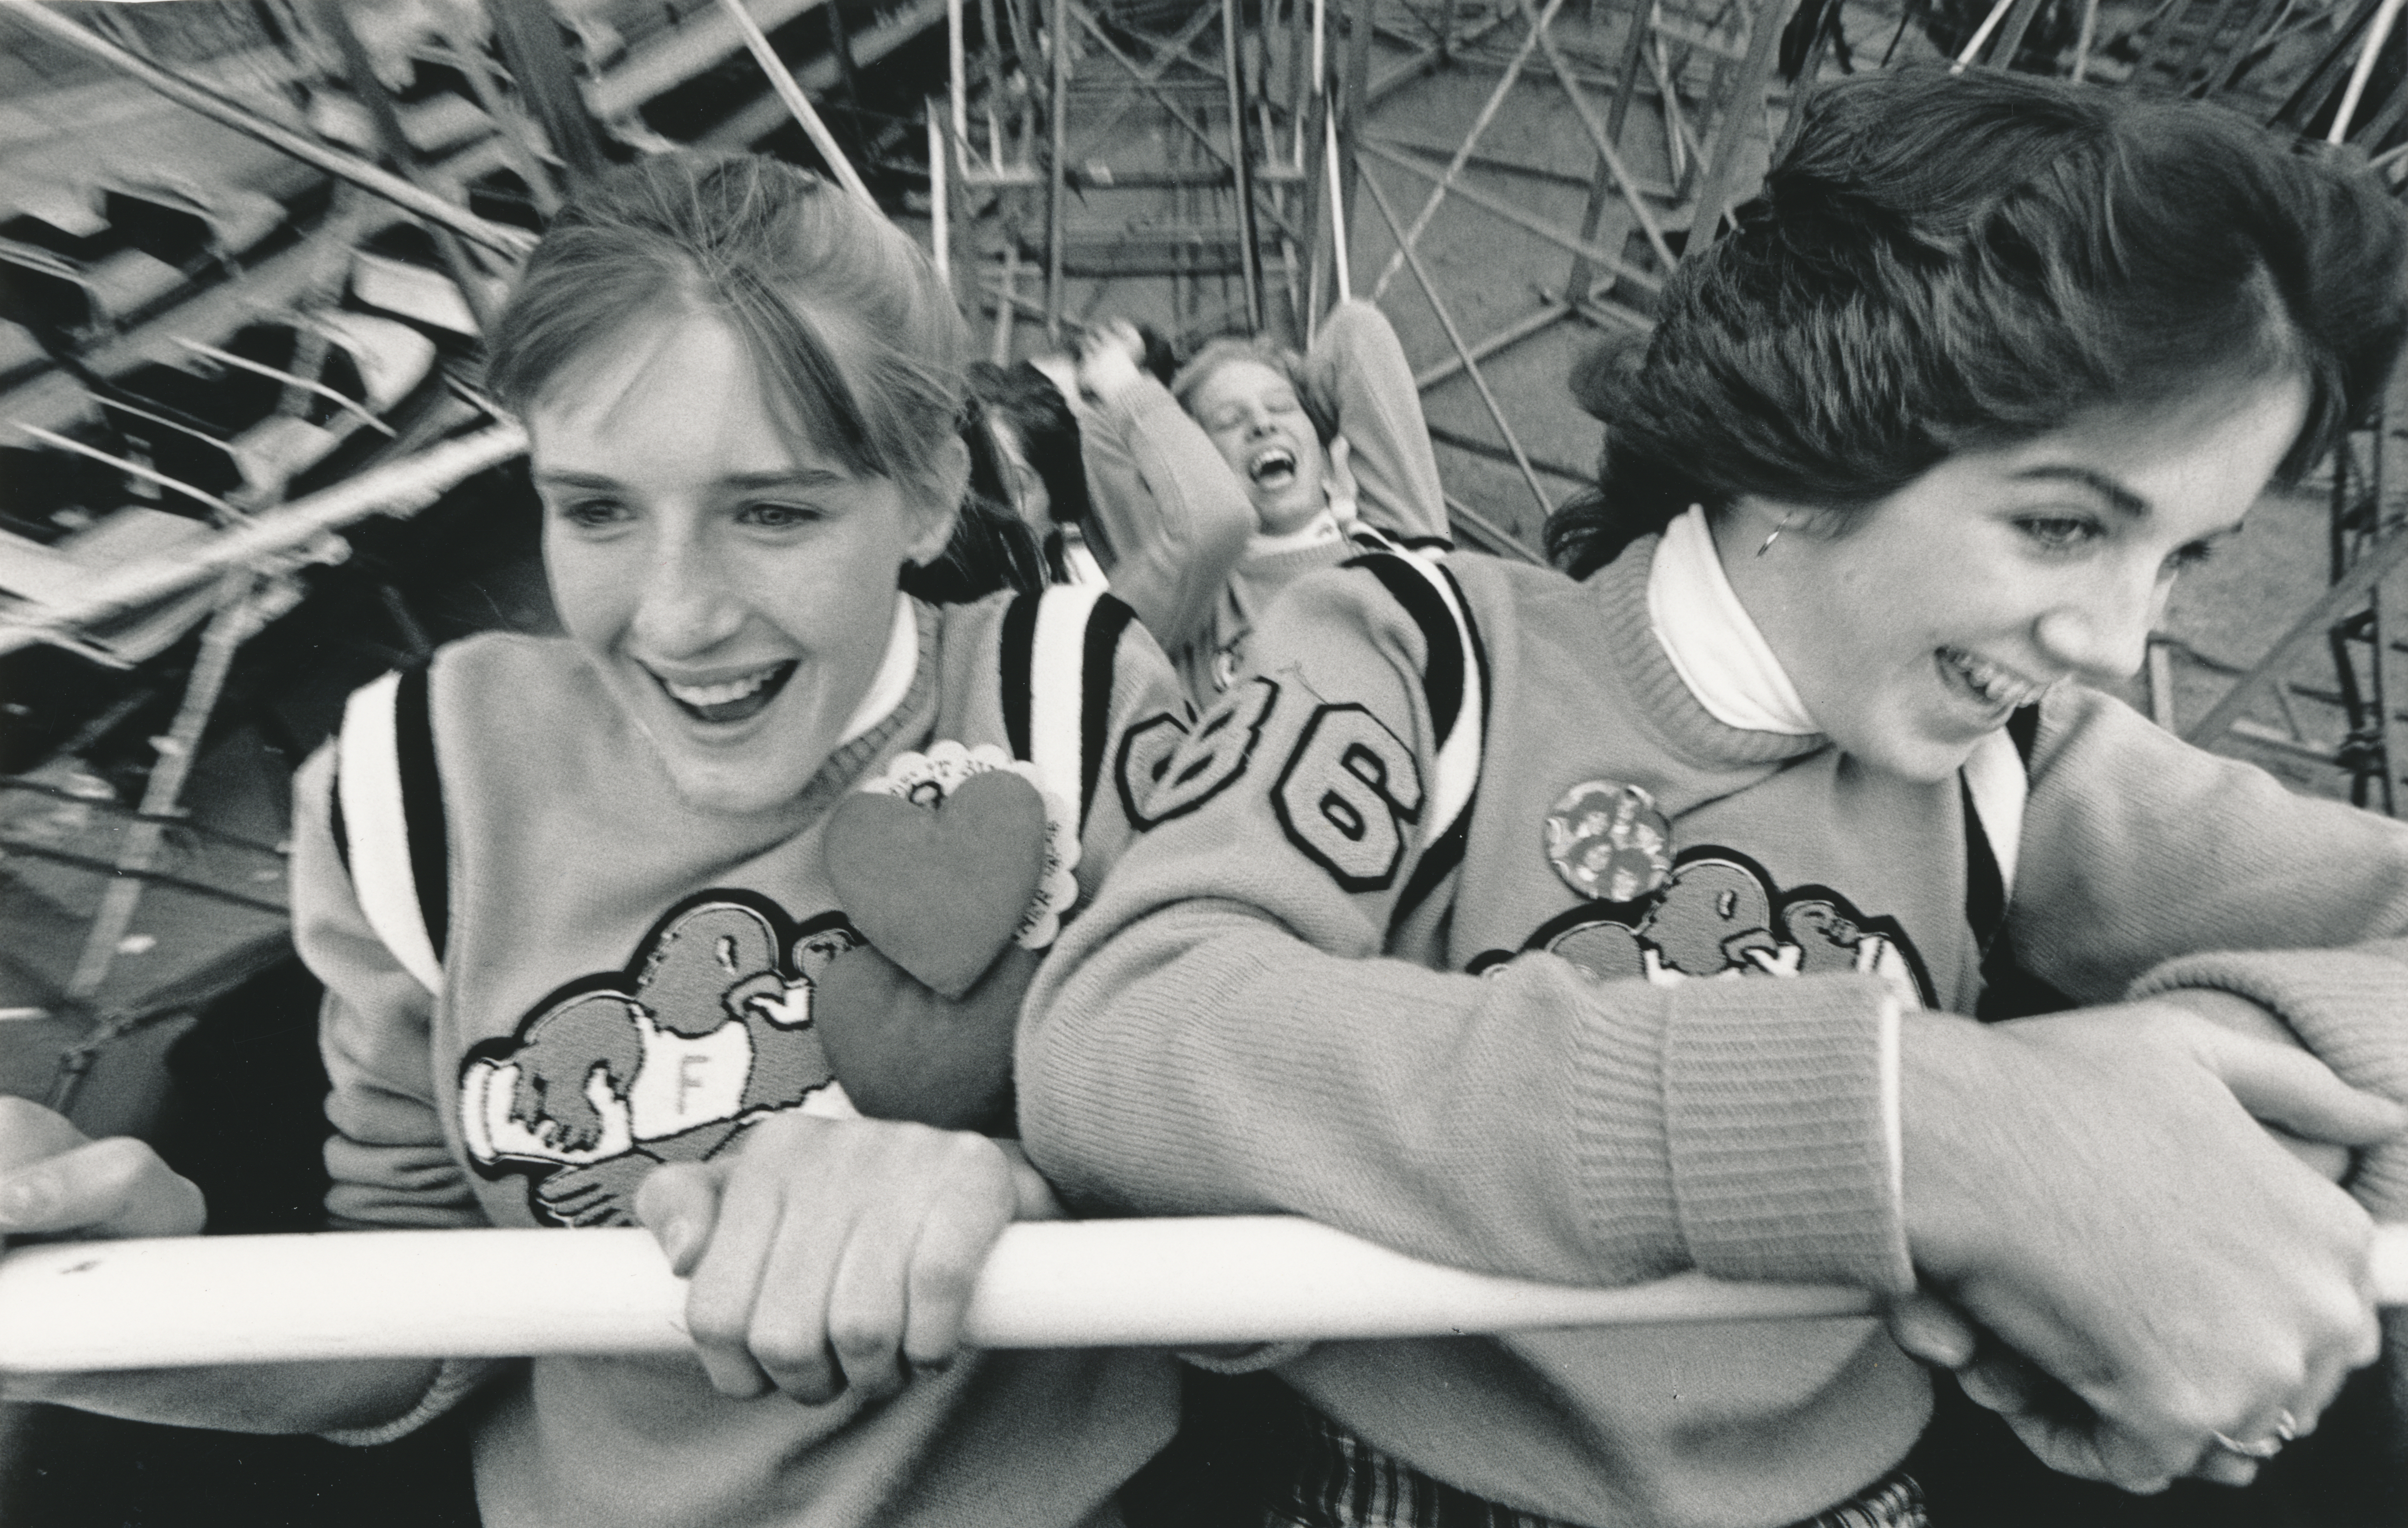 Cheerleaders on the roller coaster at Riverside Park in Agawam Massachusetts. 1980s. (Michael S. Gordon / The Republican)